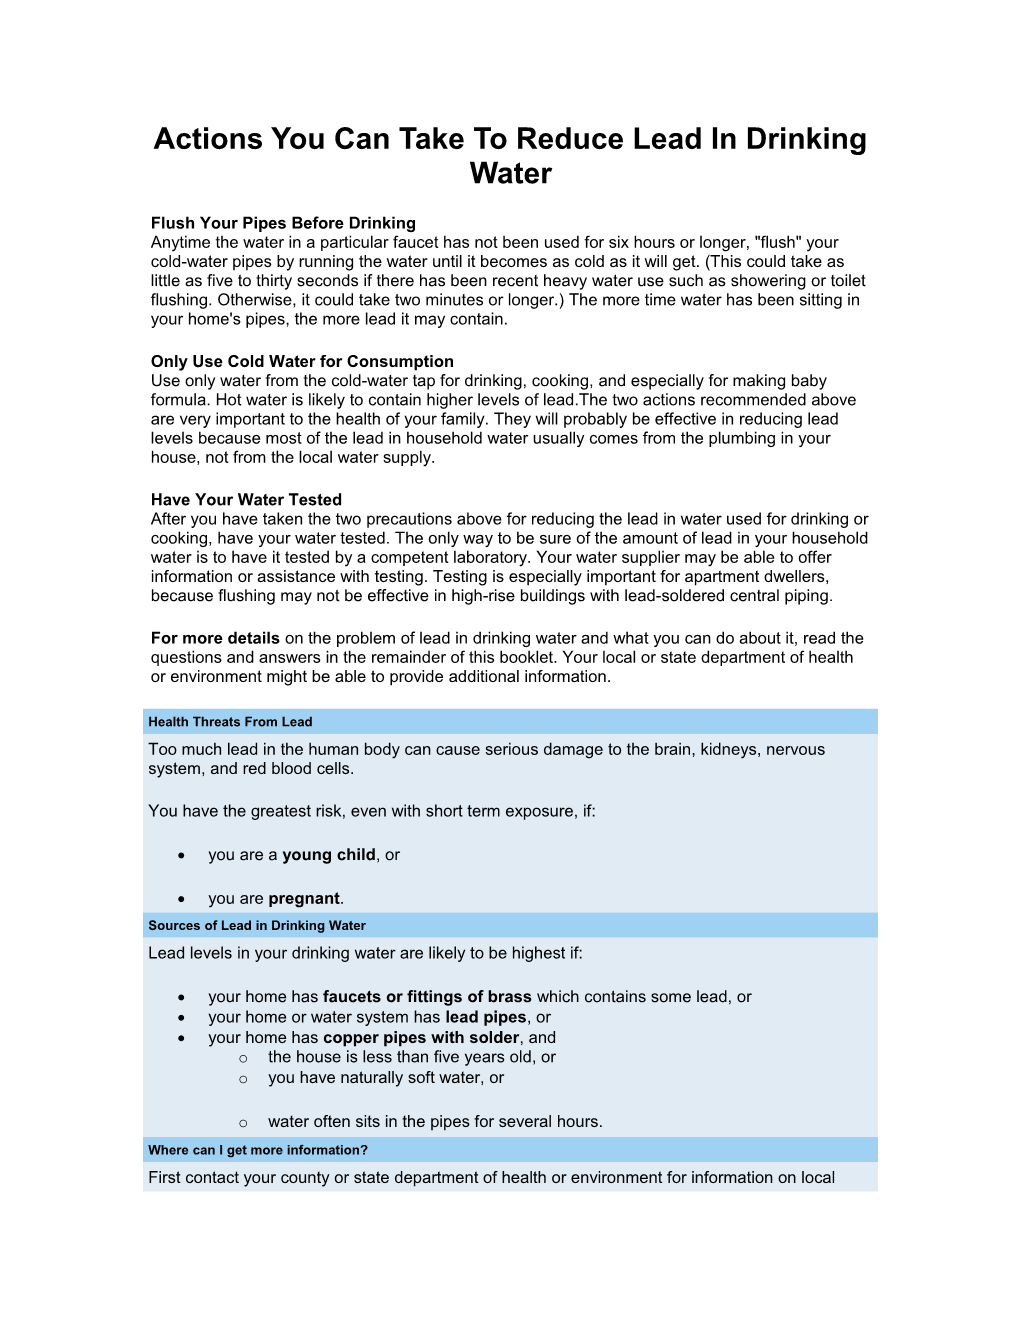 Actions You Can Take to Reduce Lead in Drinking Water